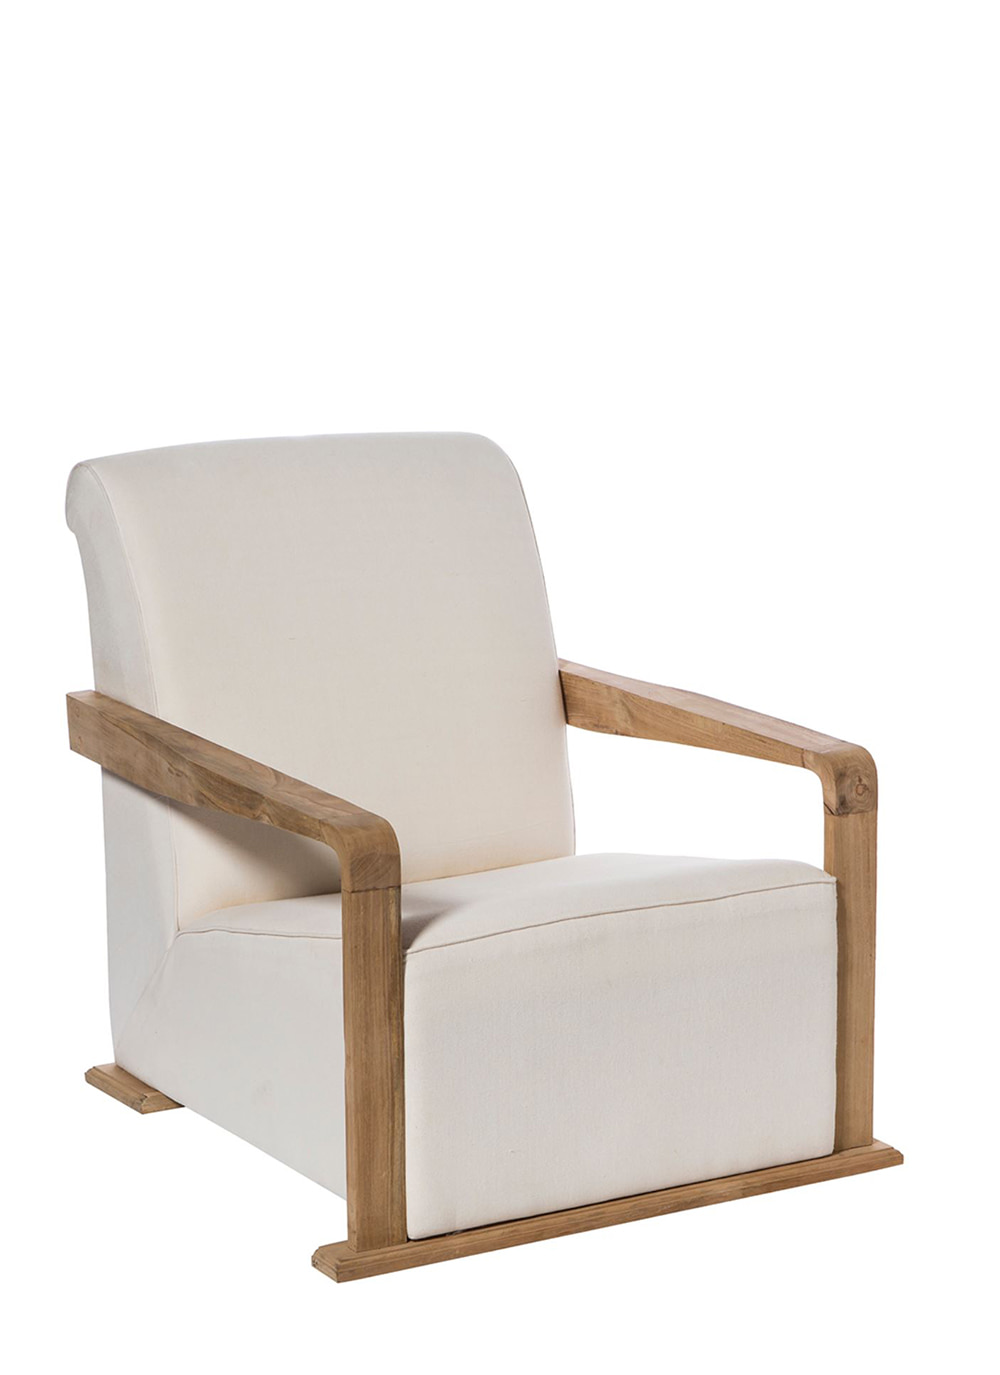 LAFAYETTE ARMCHAIR WITH WHITE UPHOLSTERY 가격문의